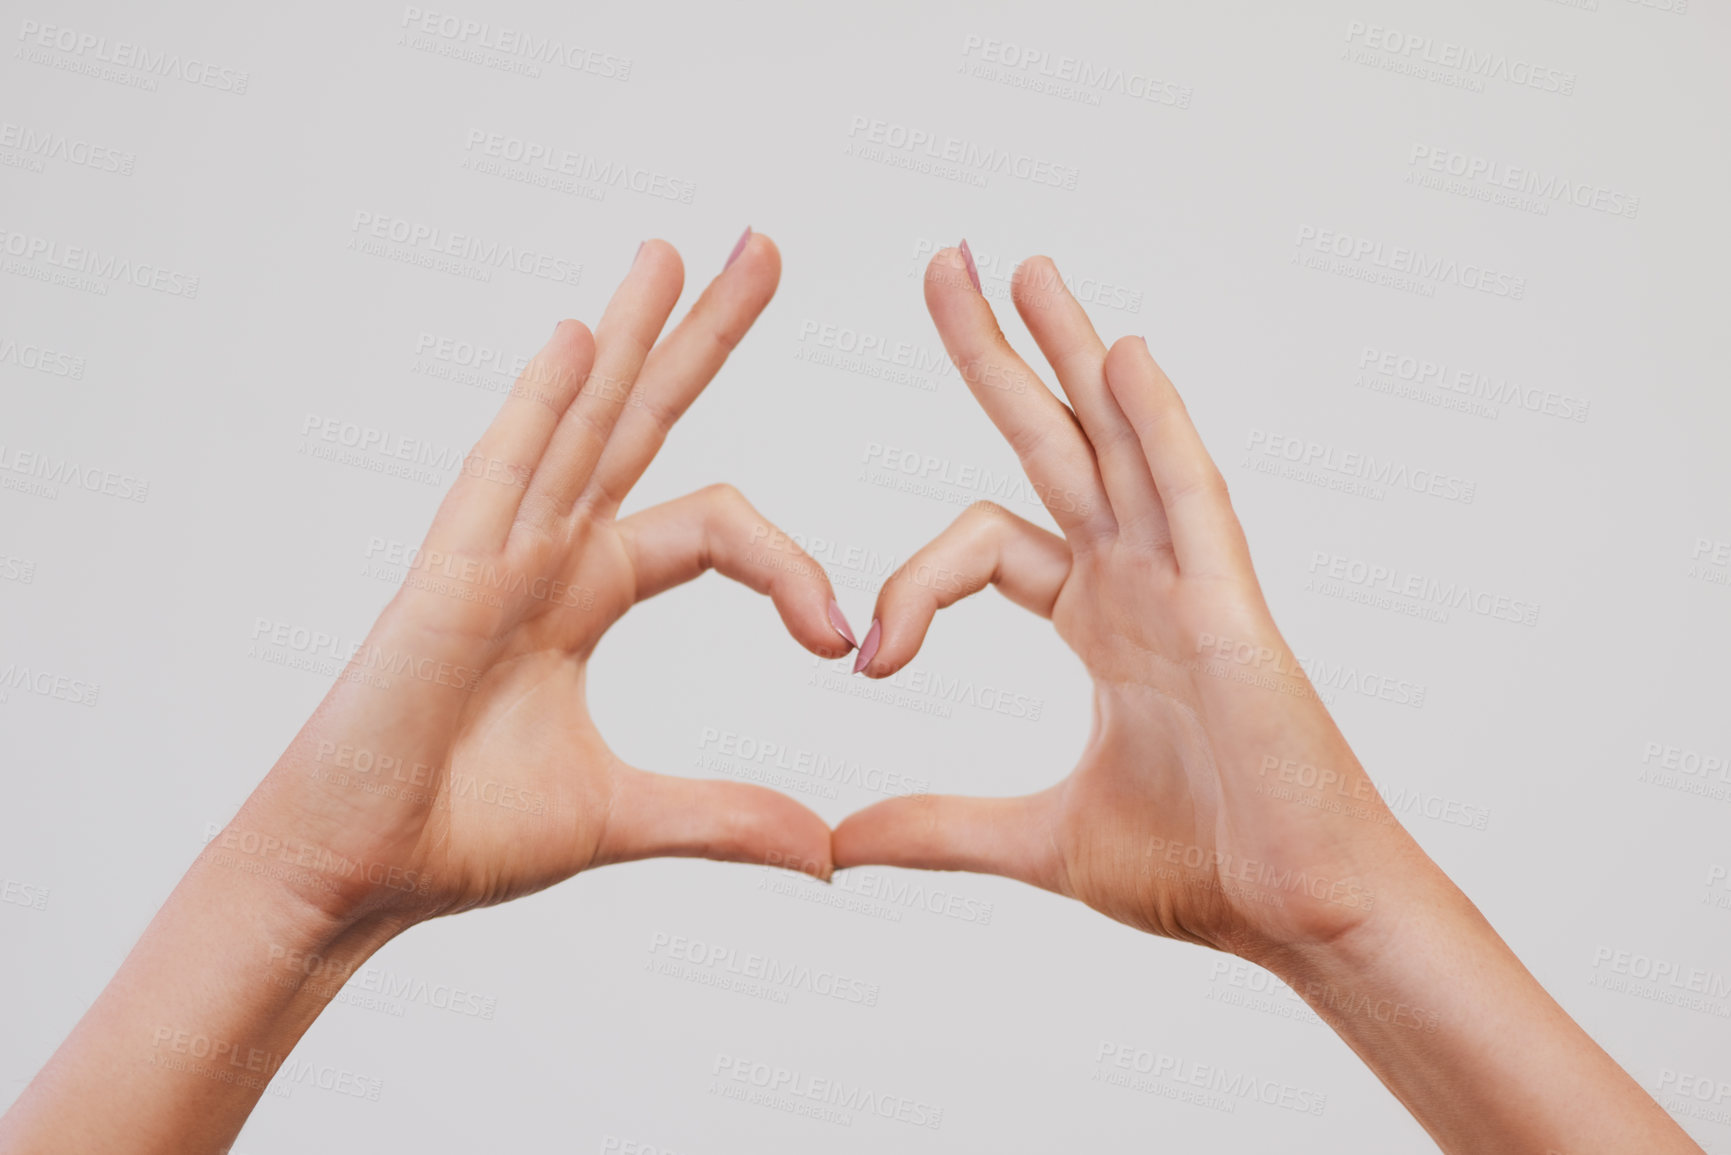 Buy stock photo Studio shot of a unrecognizable person's hands making a heart shape against a grey background